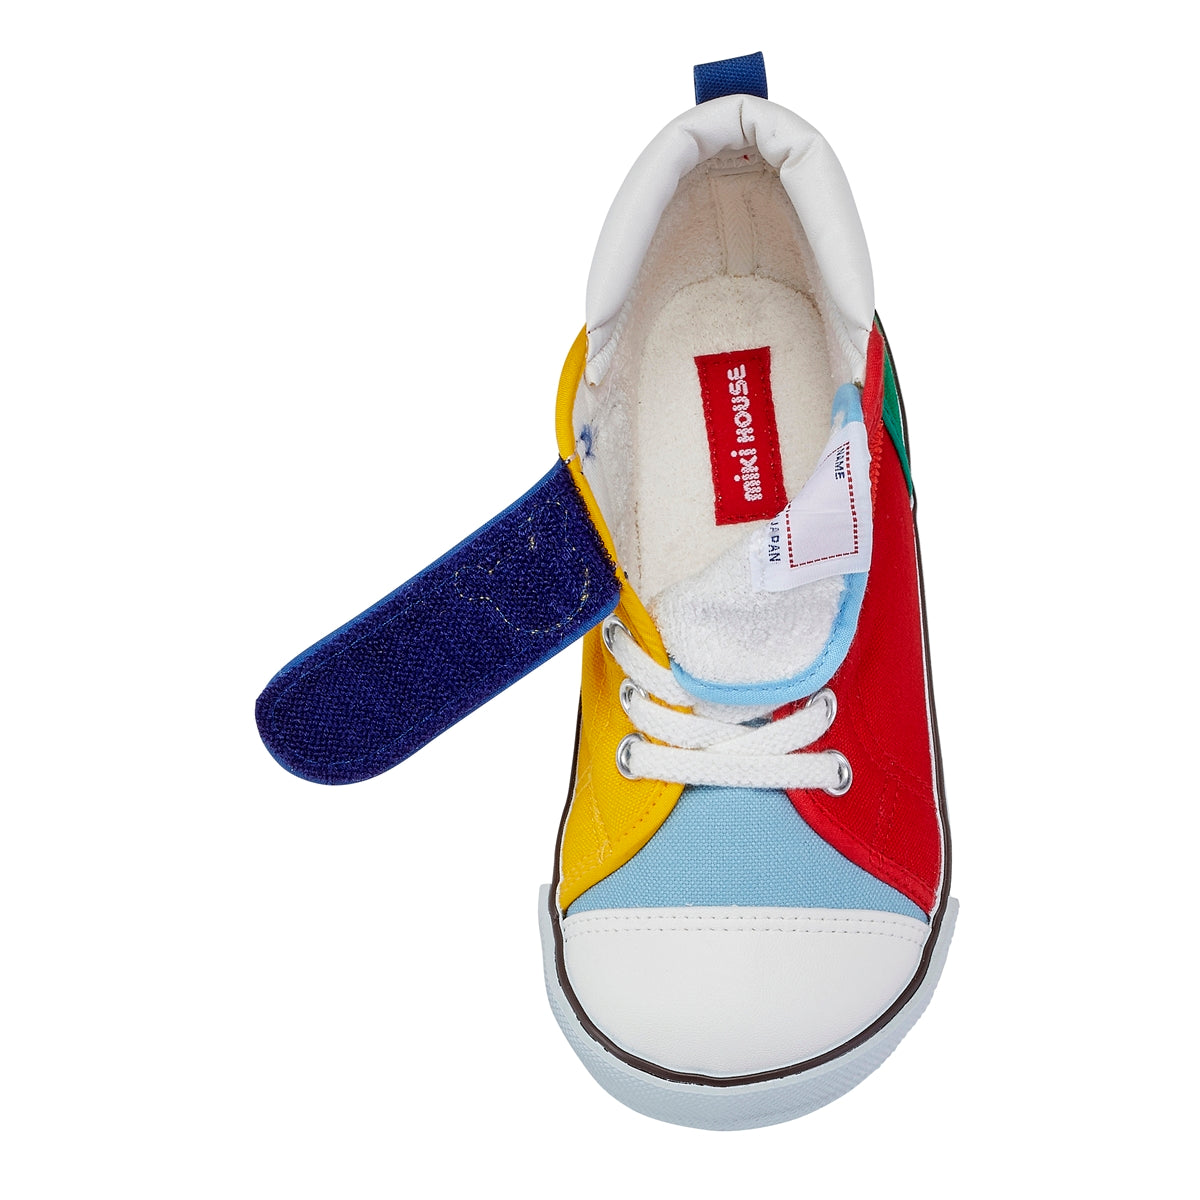 Starstruck Pucci Sneakers for Kids